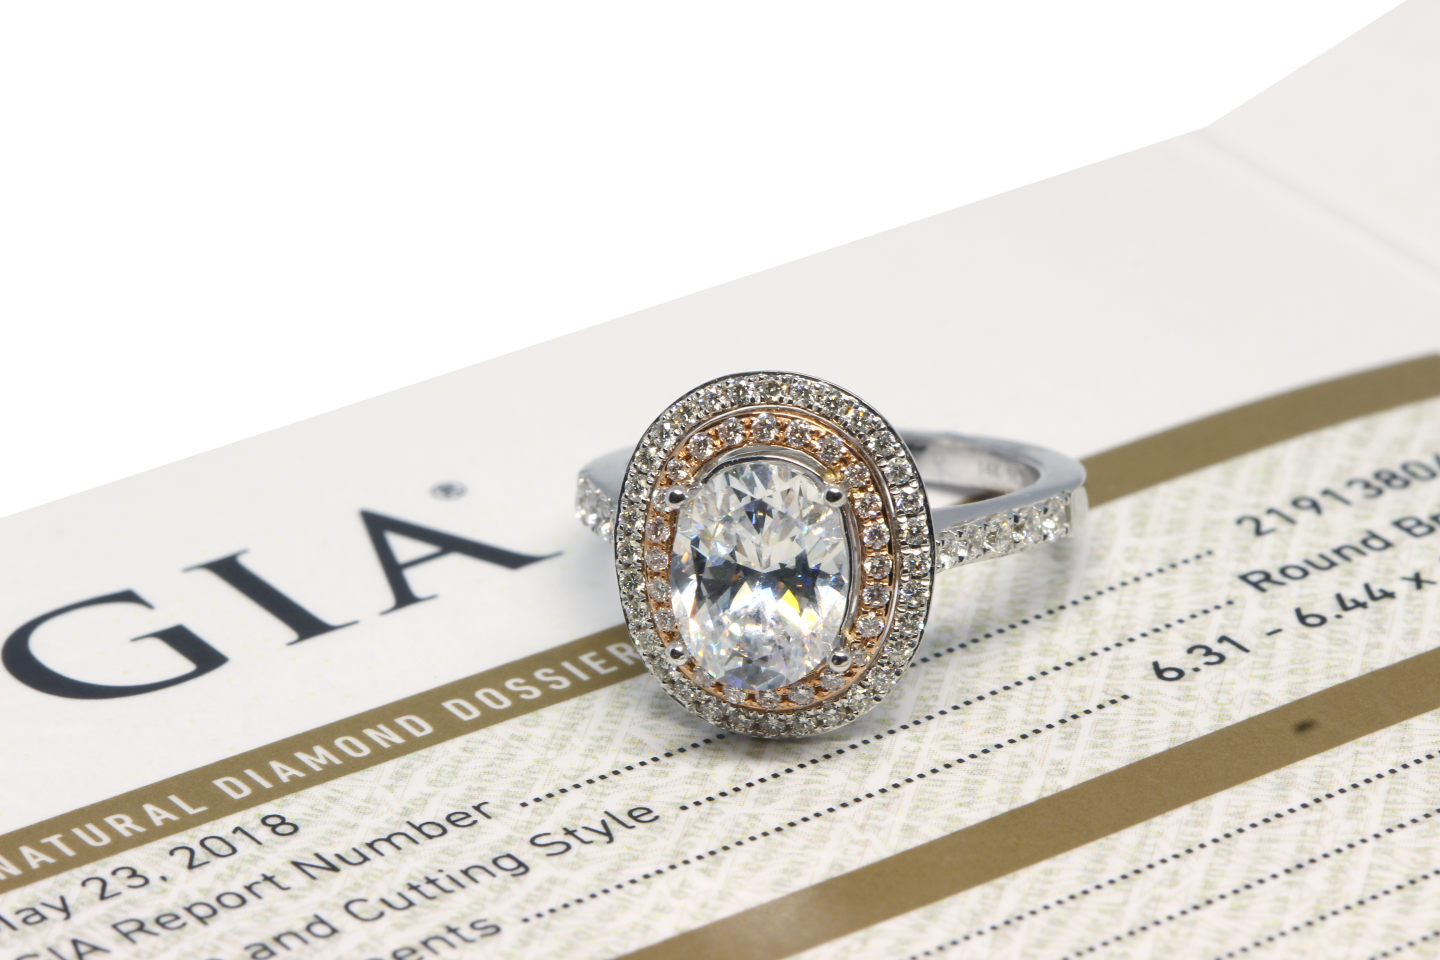 Is your Jewelry Appraisal Inflated?